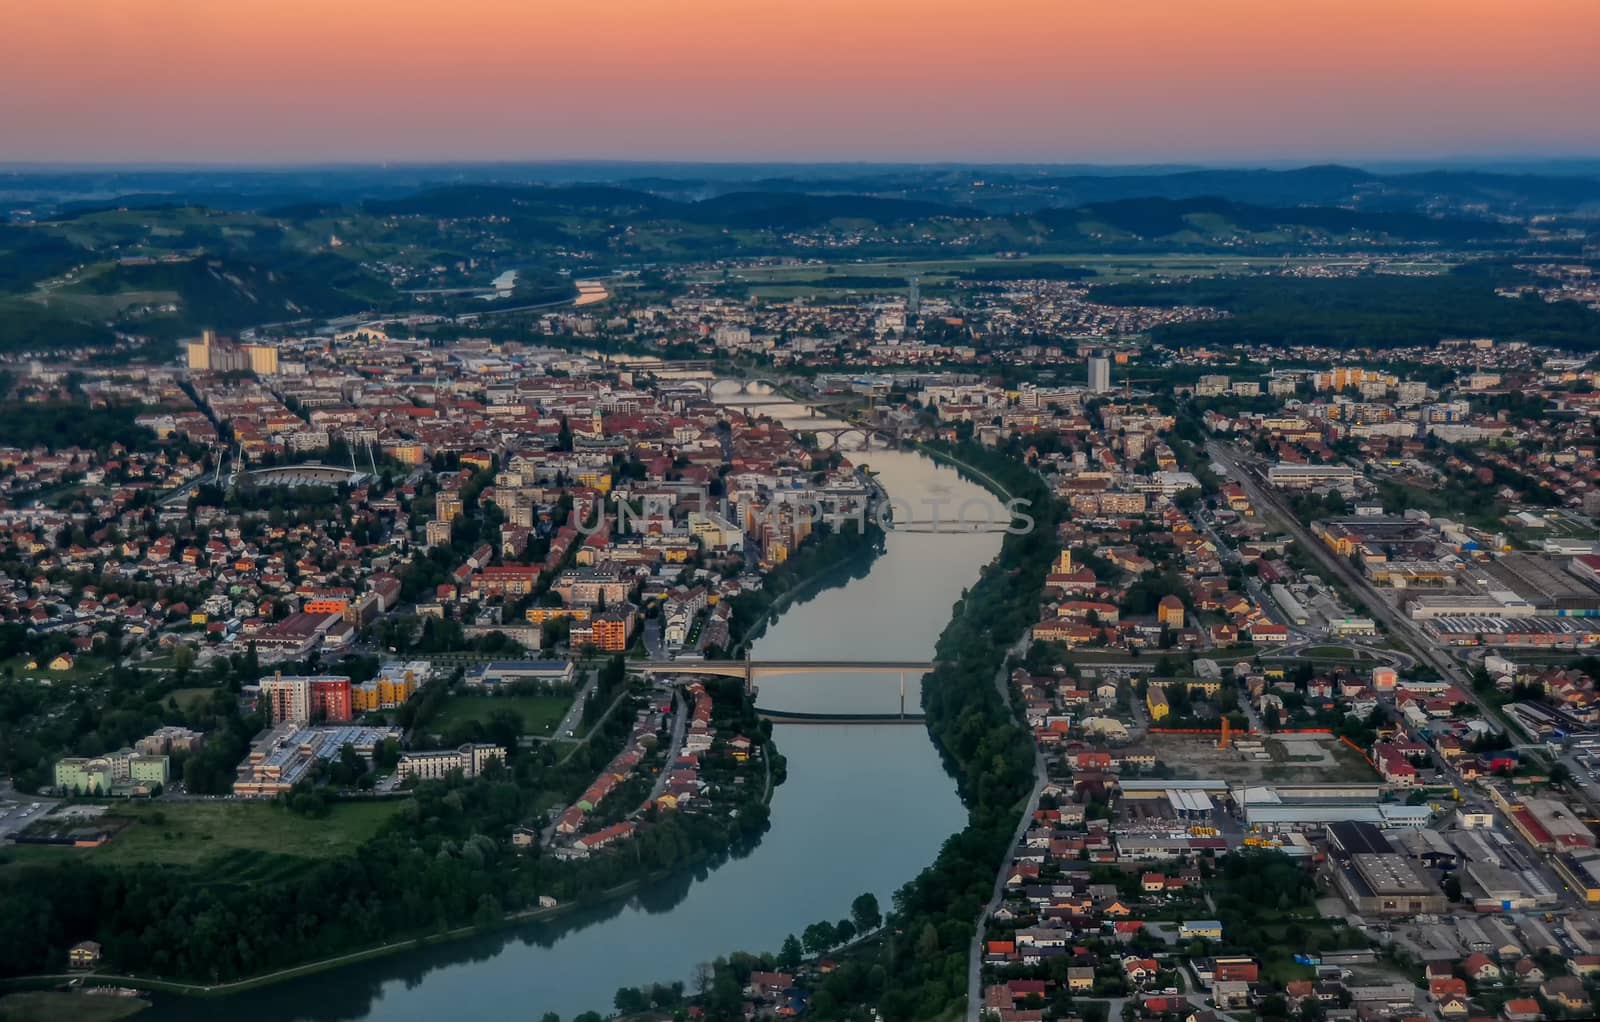 Aerial view of european city with river and bridges at sunset, Maribor, Slovenia by asafaric